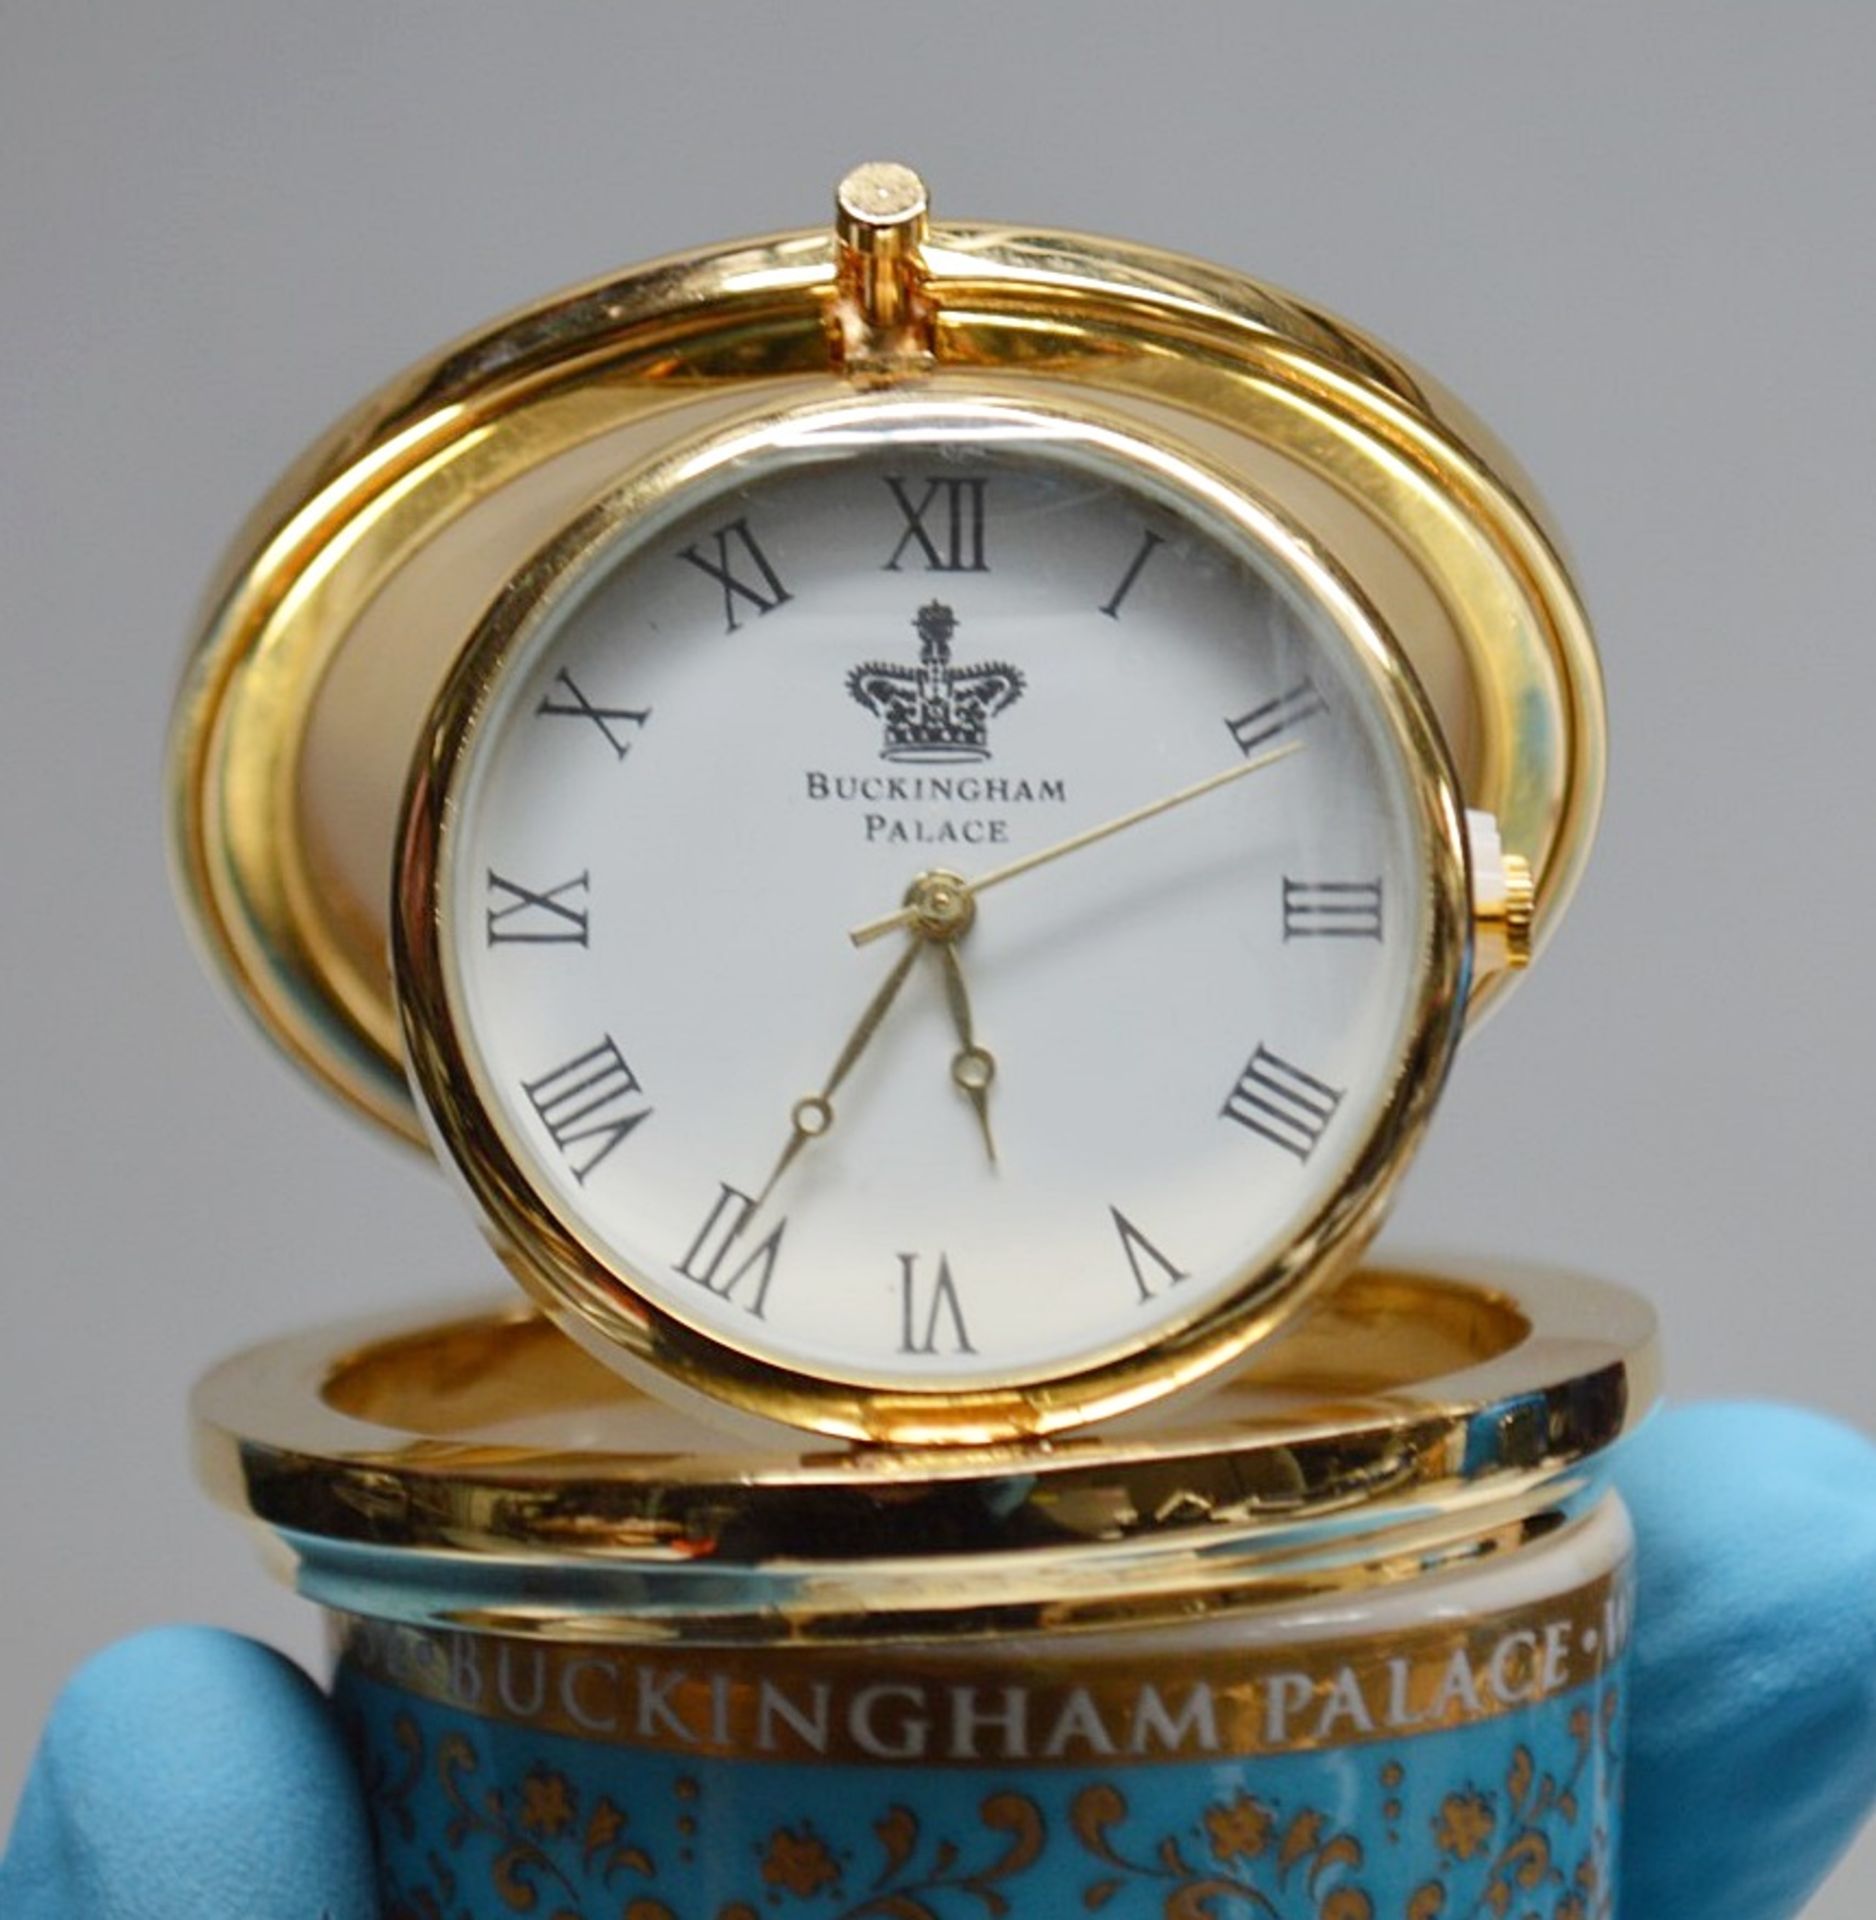 1 x Royal Collection 'Trust' Flip Up Clock With A Fine Bone China Lid - Made In England - Ref: